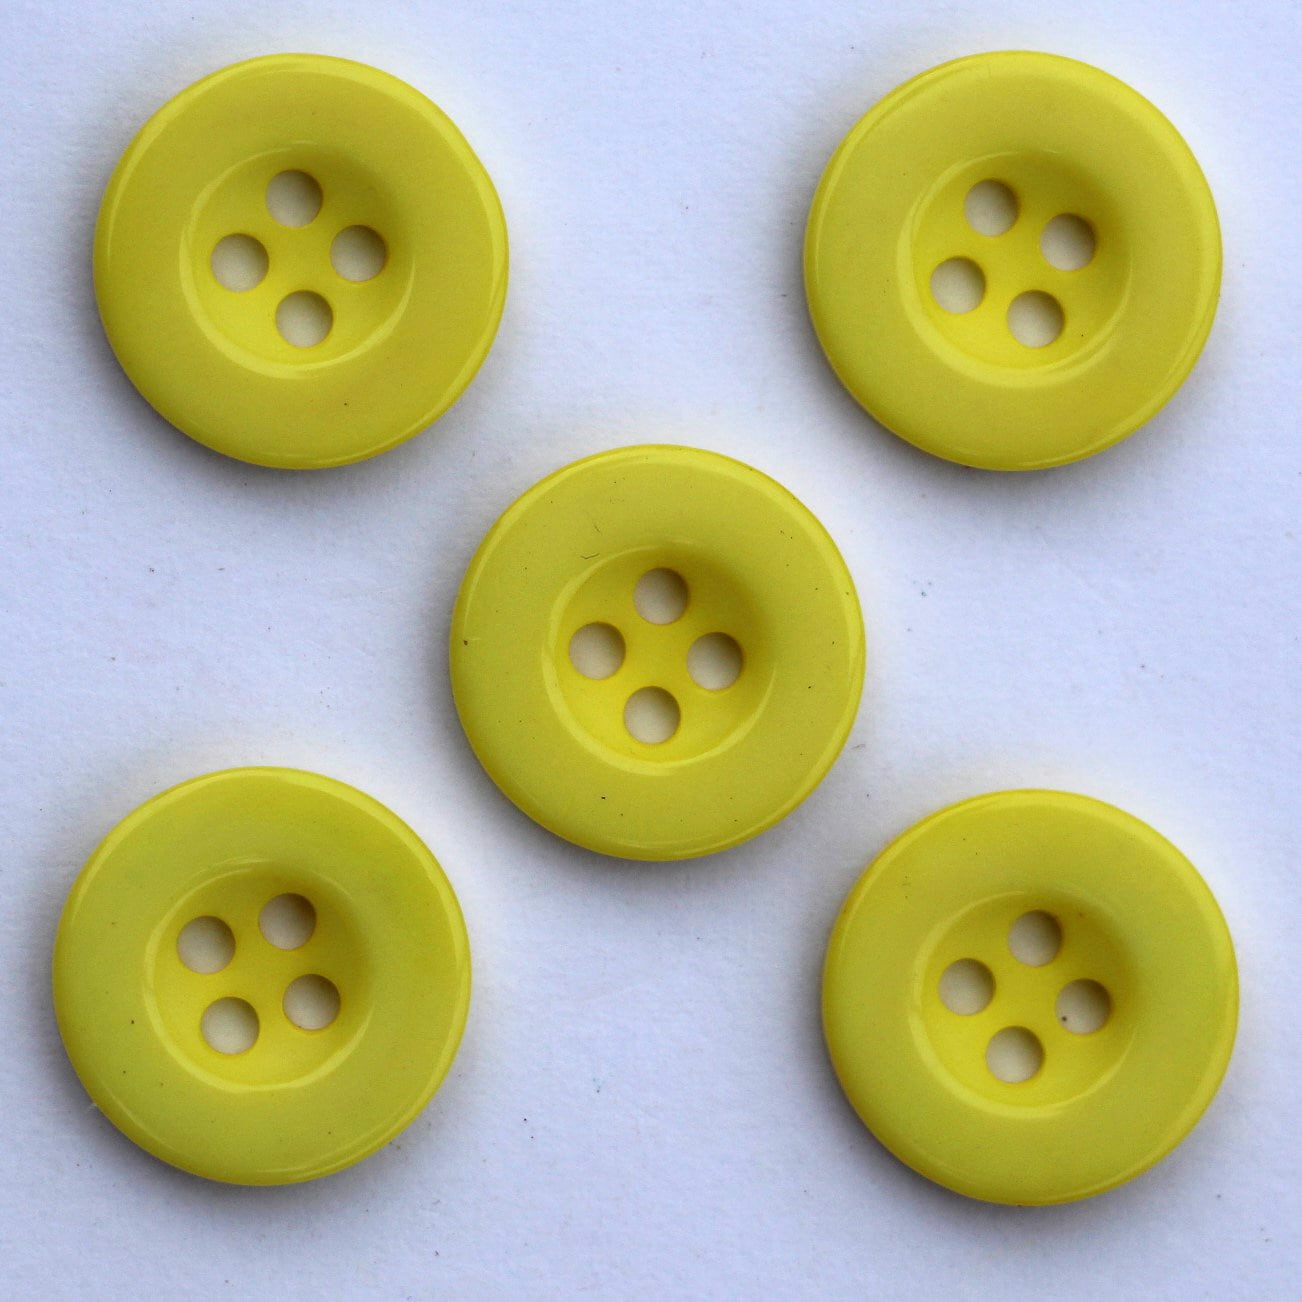  12 Pcs Yellow Sewing Buttons 4 Hole Round Buttons 0.4